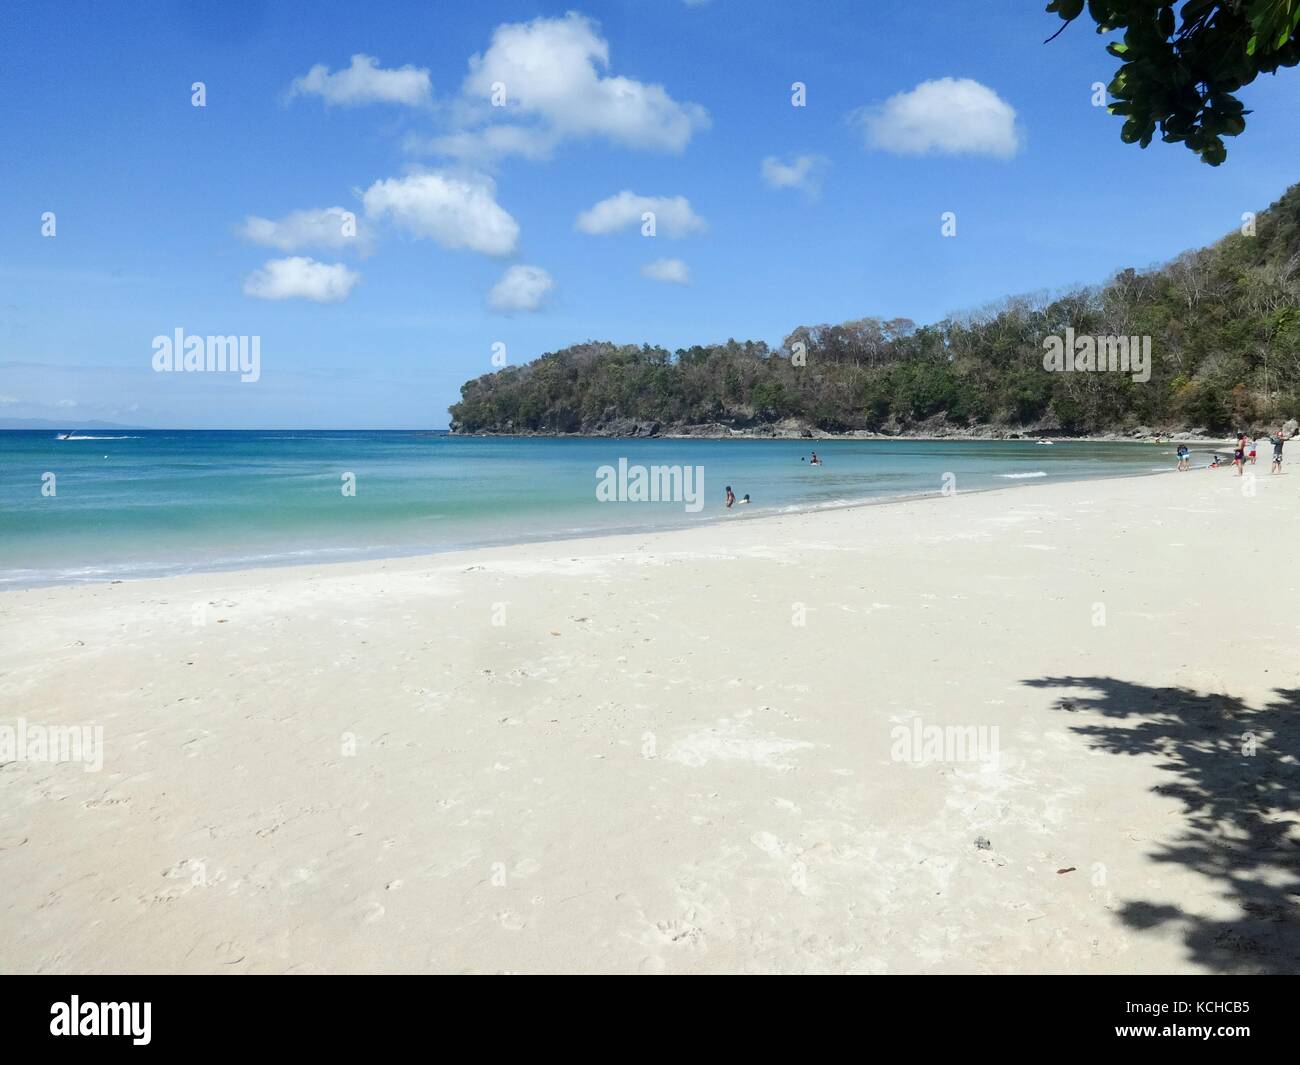 White sandy beach and blue clear water in the local summer destination of Siquijor Island Stock Photo